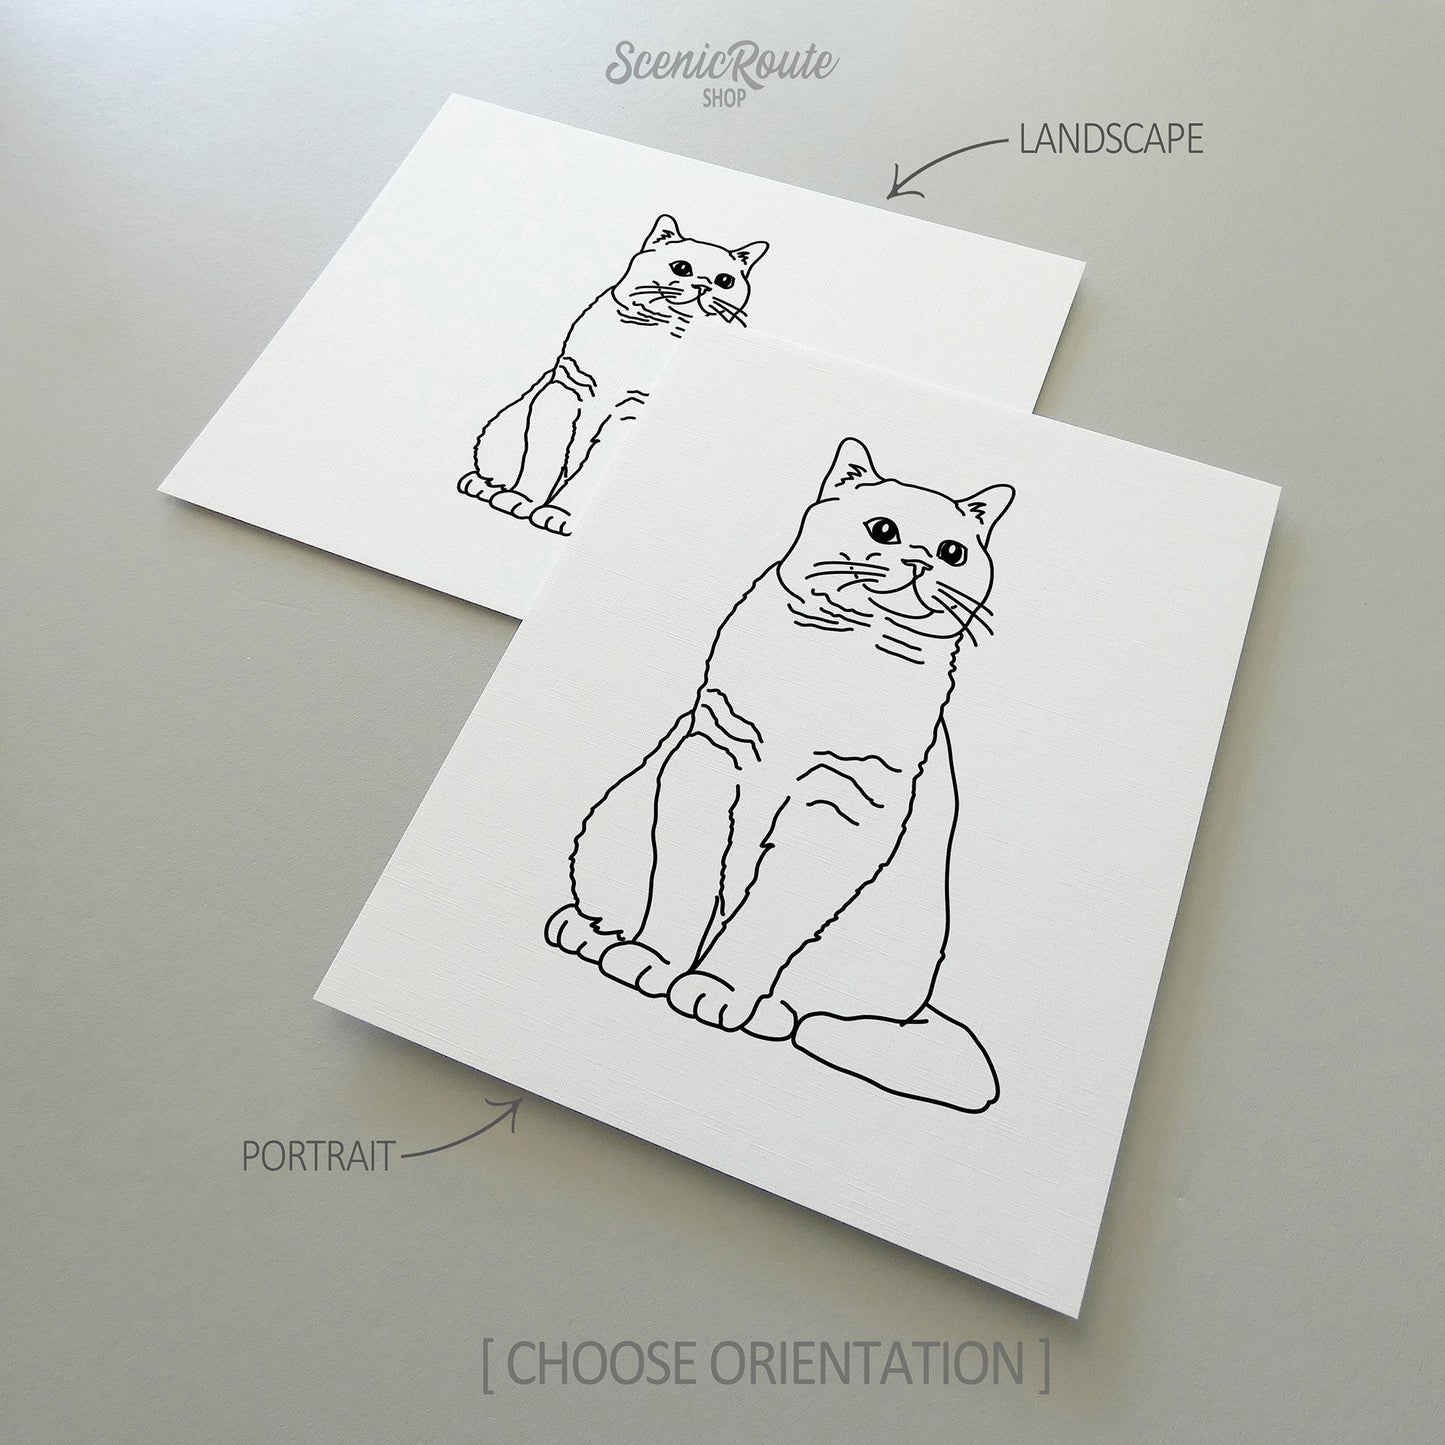 Two line art drawings of a British Shorthair cat on white linen paper with a gray background.  The pieces are shown in portrait and landscape orientation for the available art print options.